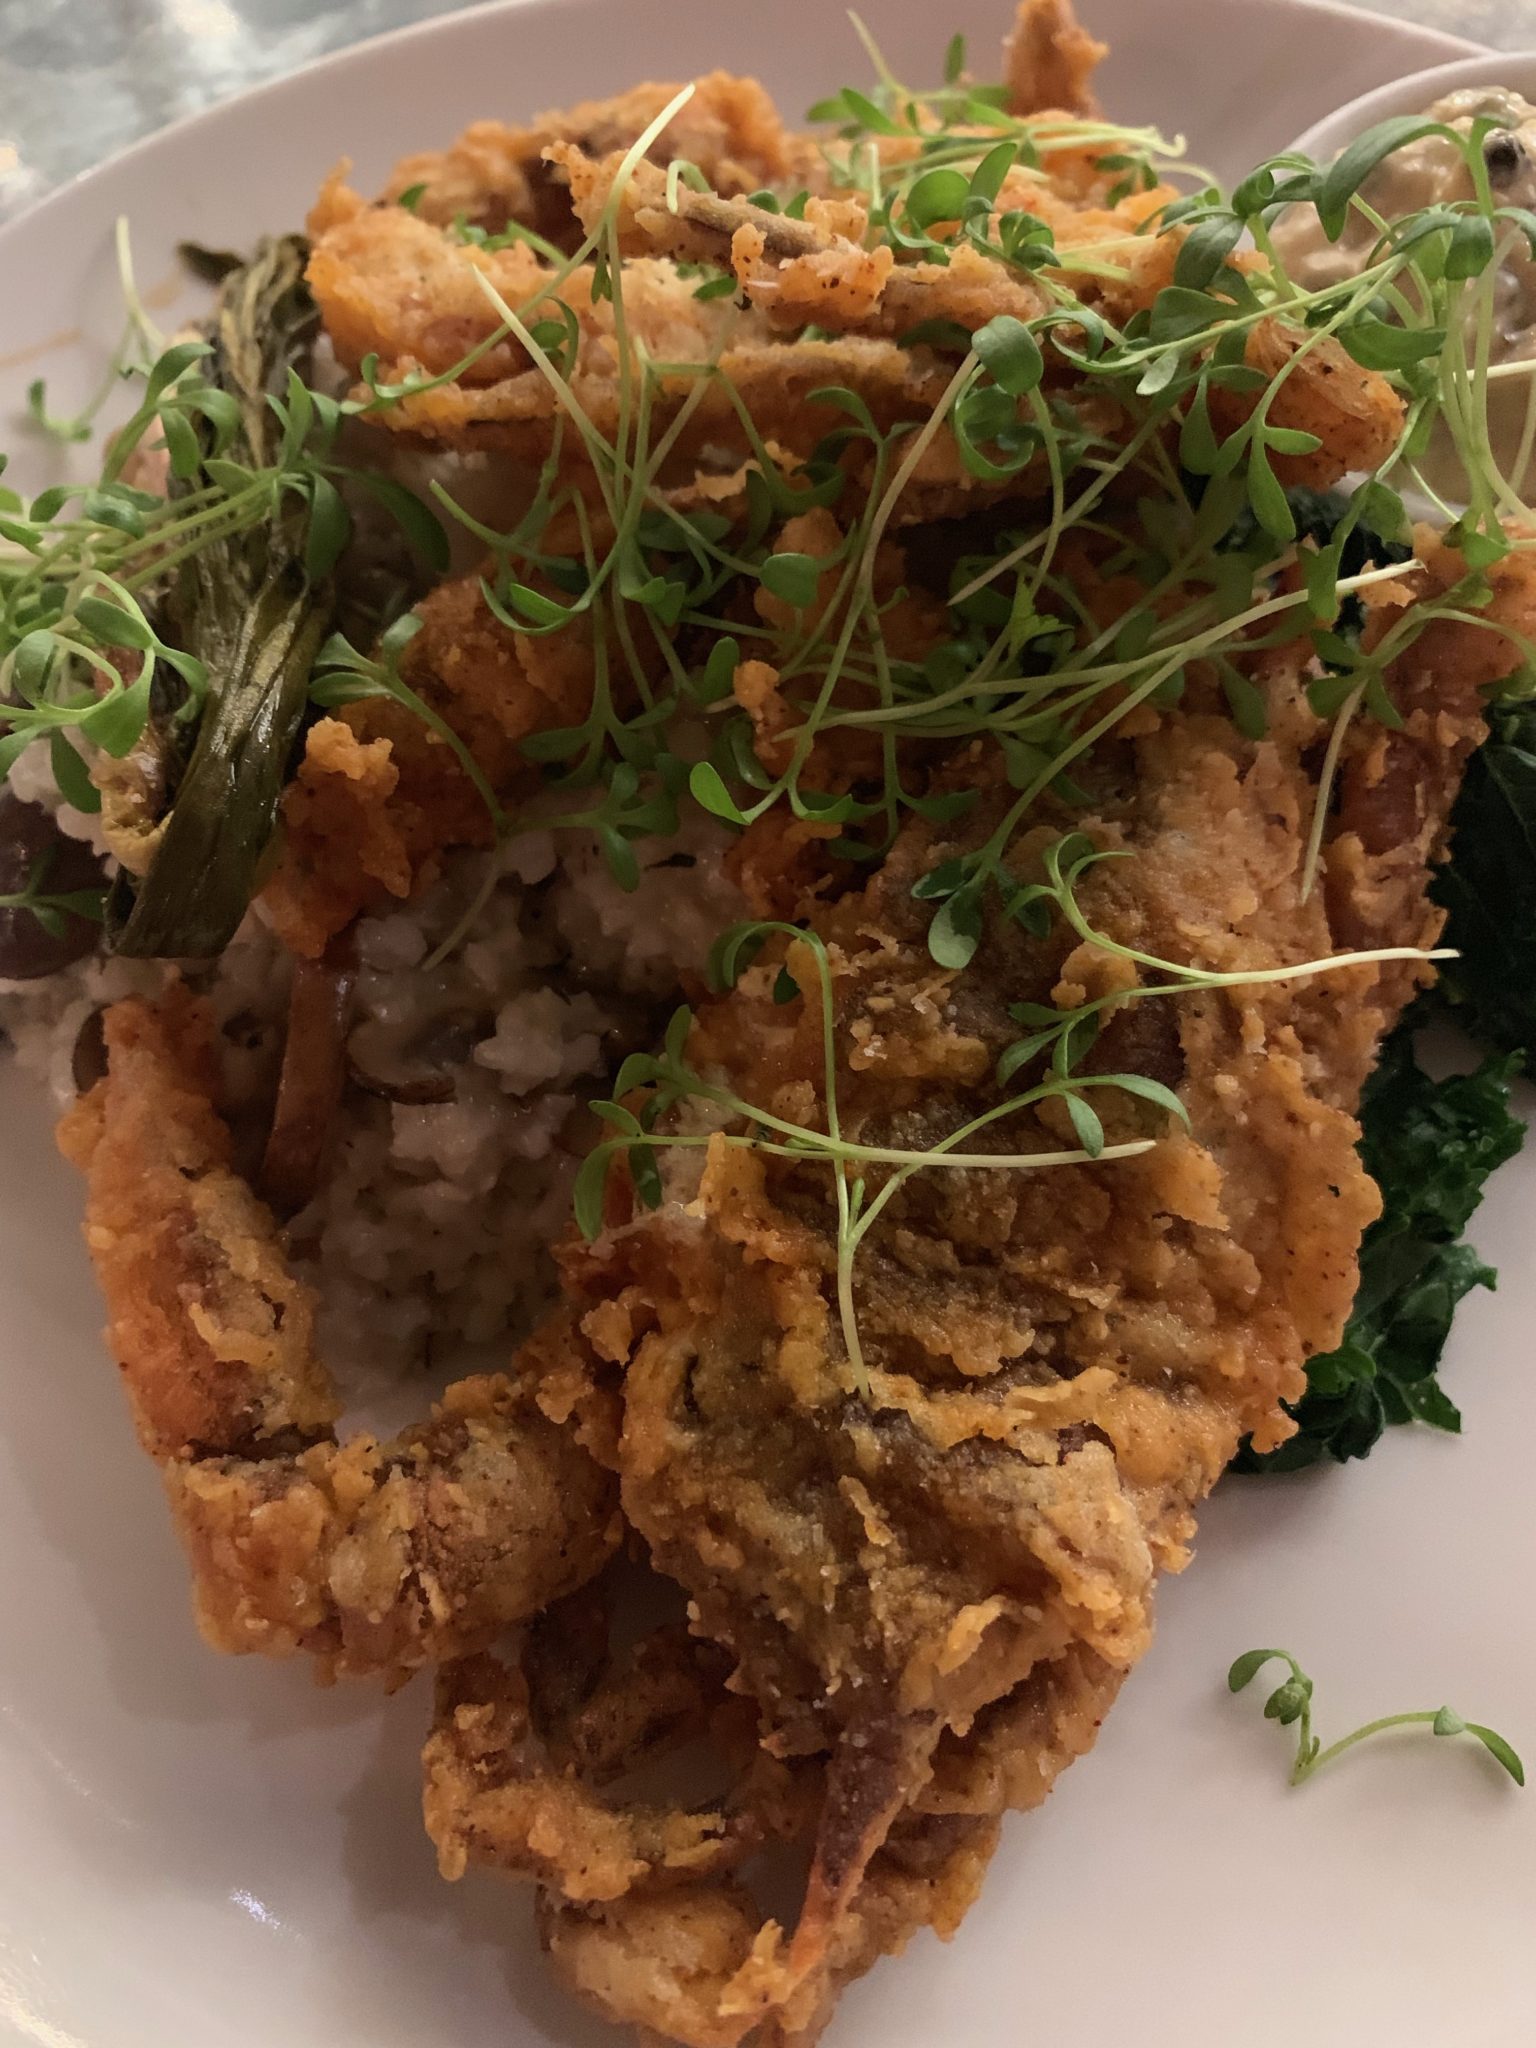 Soft shell crab with ramps and Carolina Gold Rice